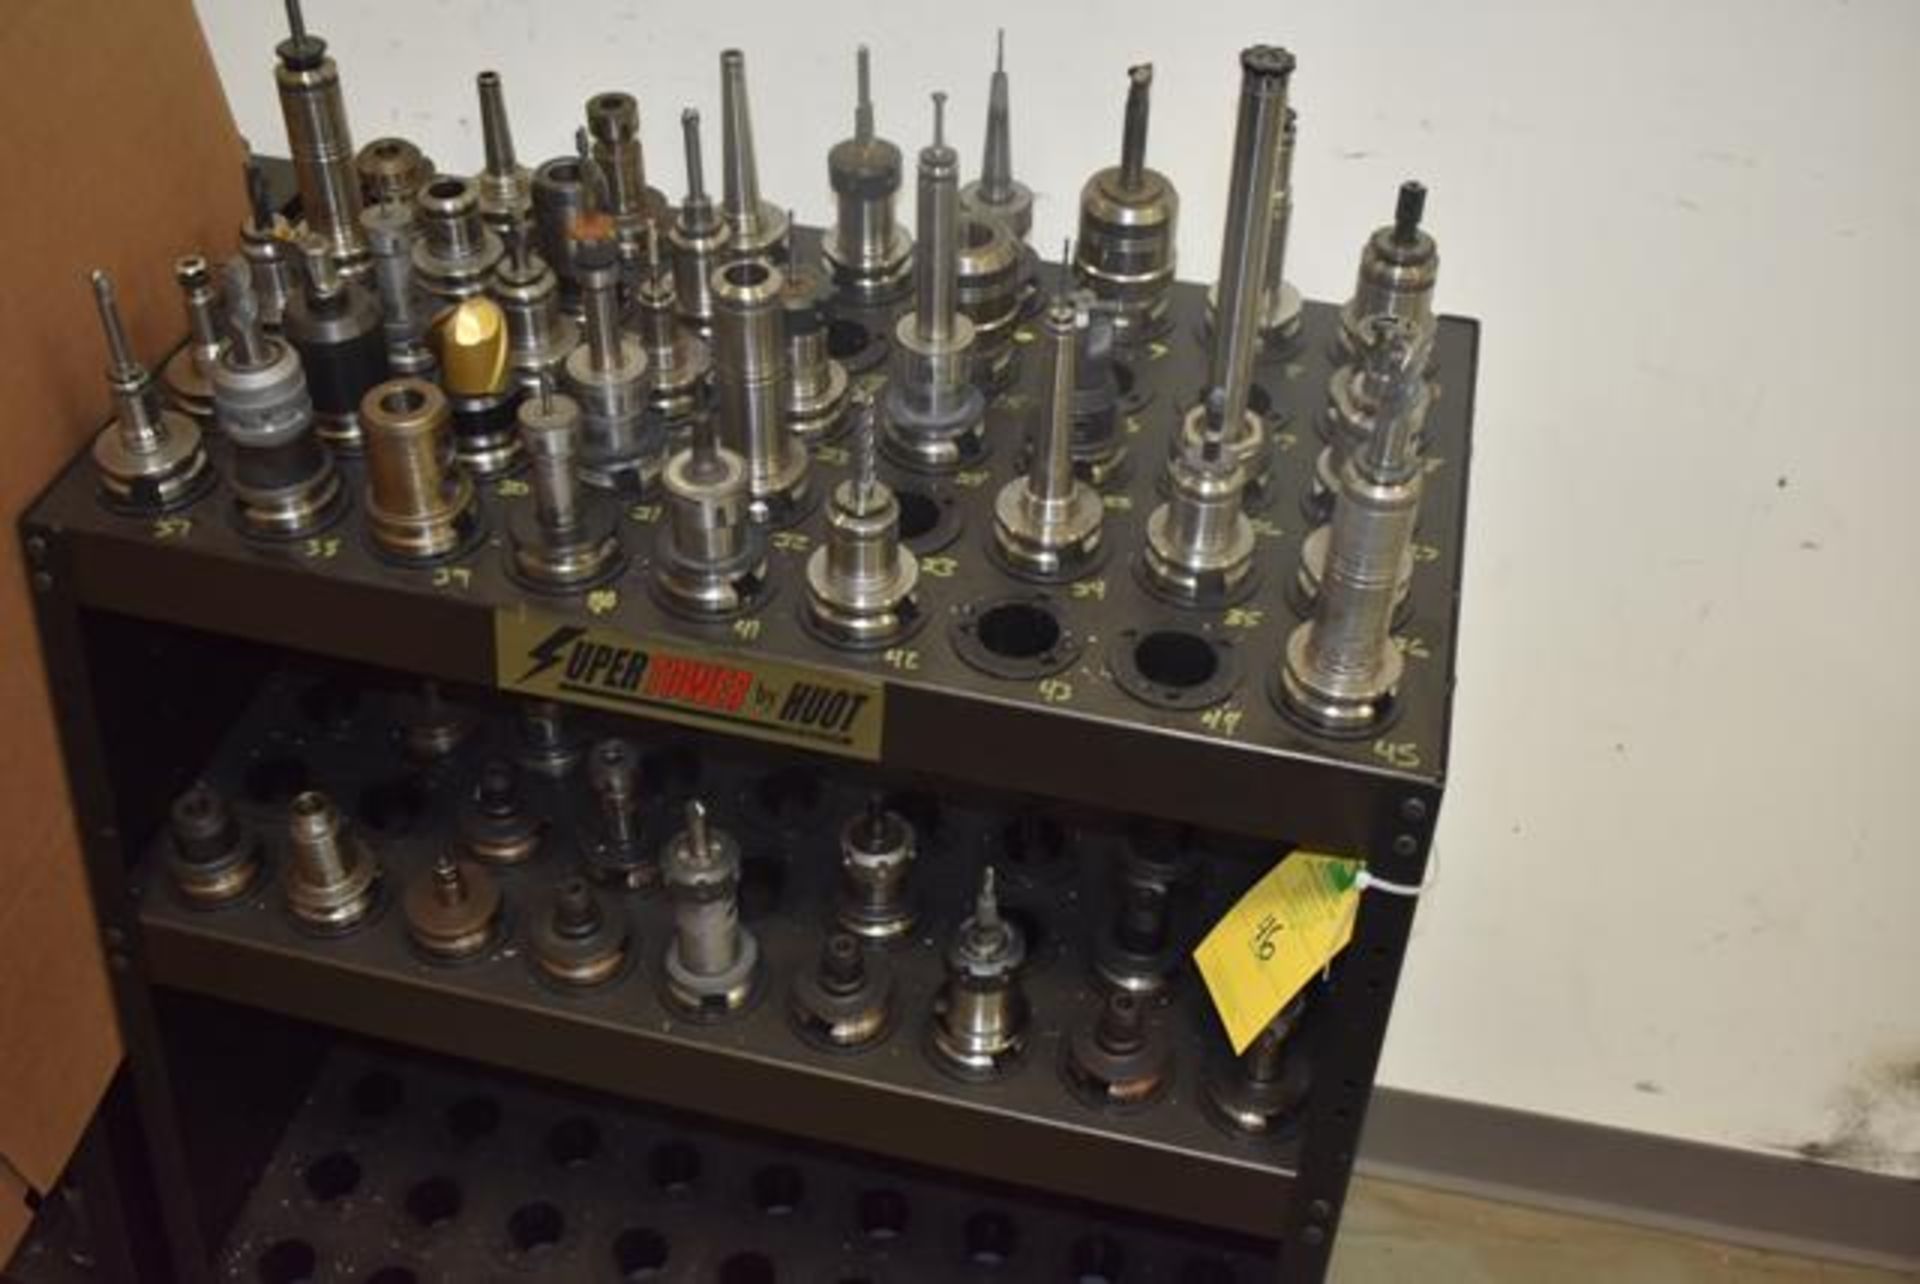 Huot Upper Tower Tool Stand with Contents (Approx. 50), Assorted BT-40 Taper Tool Holders